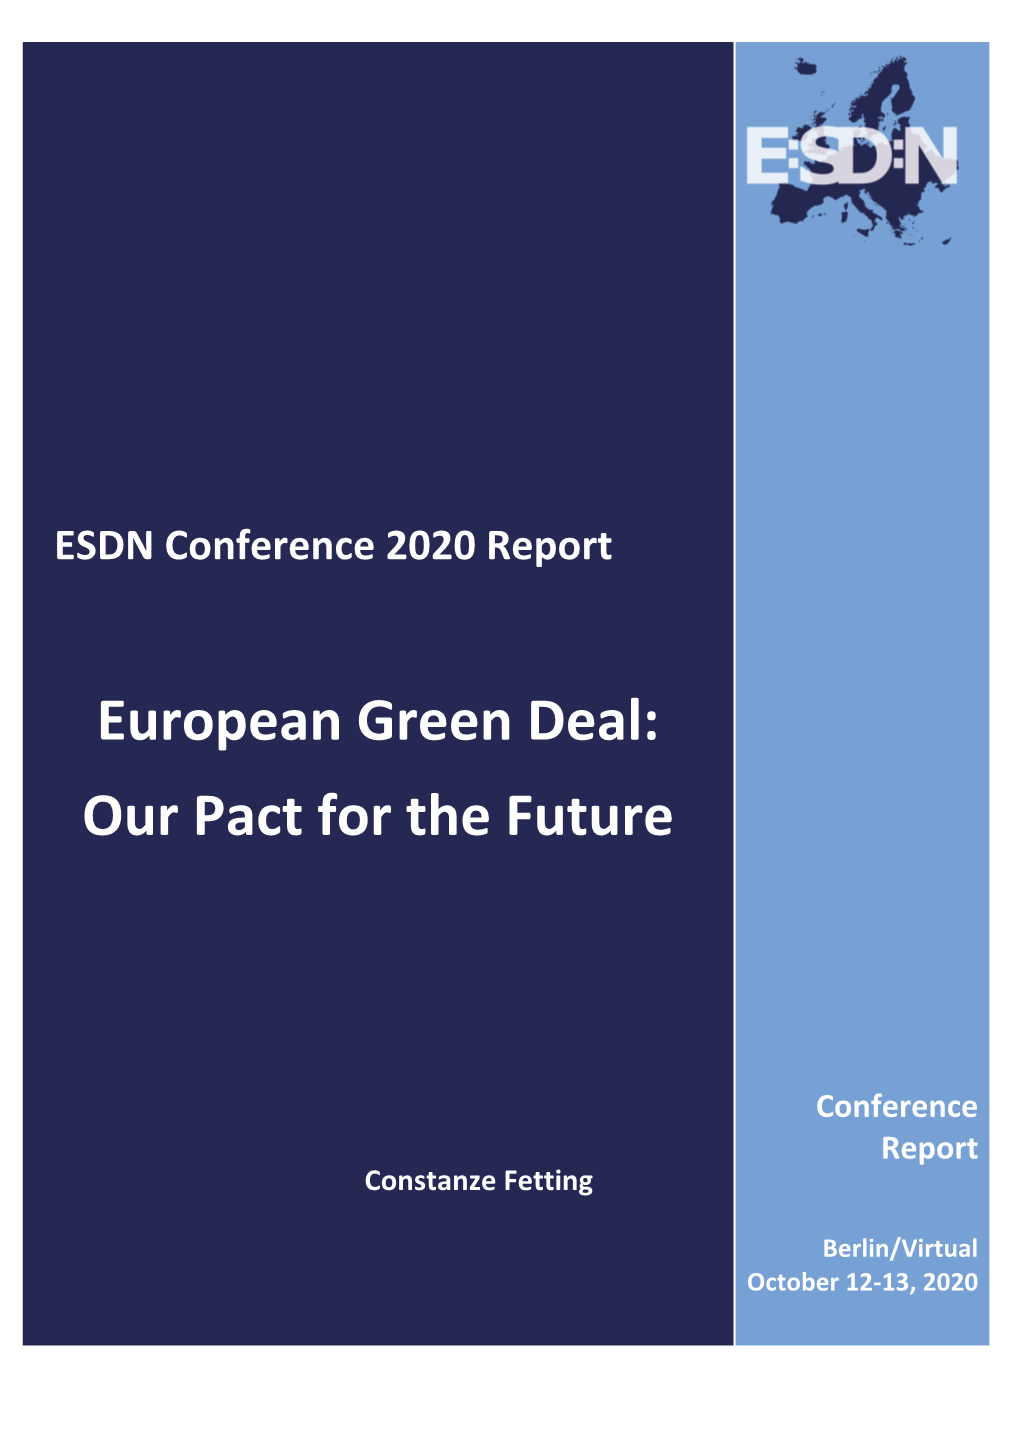 European Green Deal: Our Pact for the Future”, ESDN Conference Report, November 2020, ESDN Office, Vienna